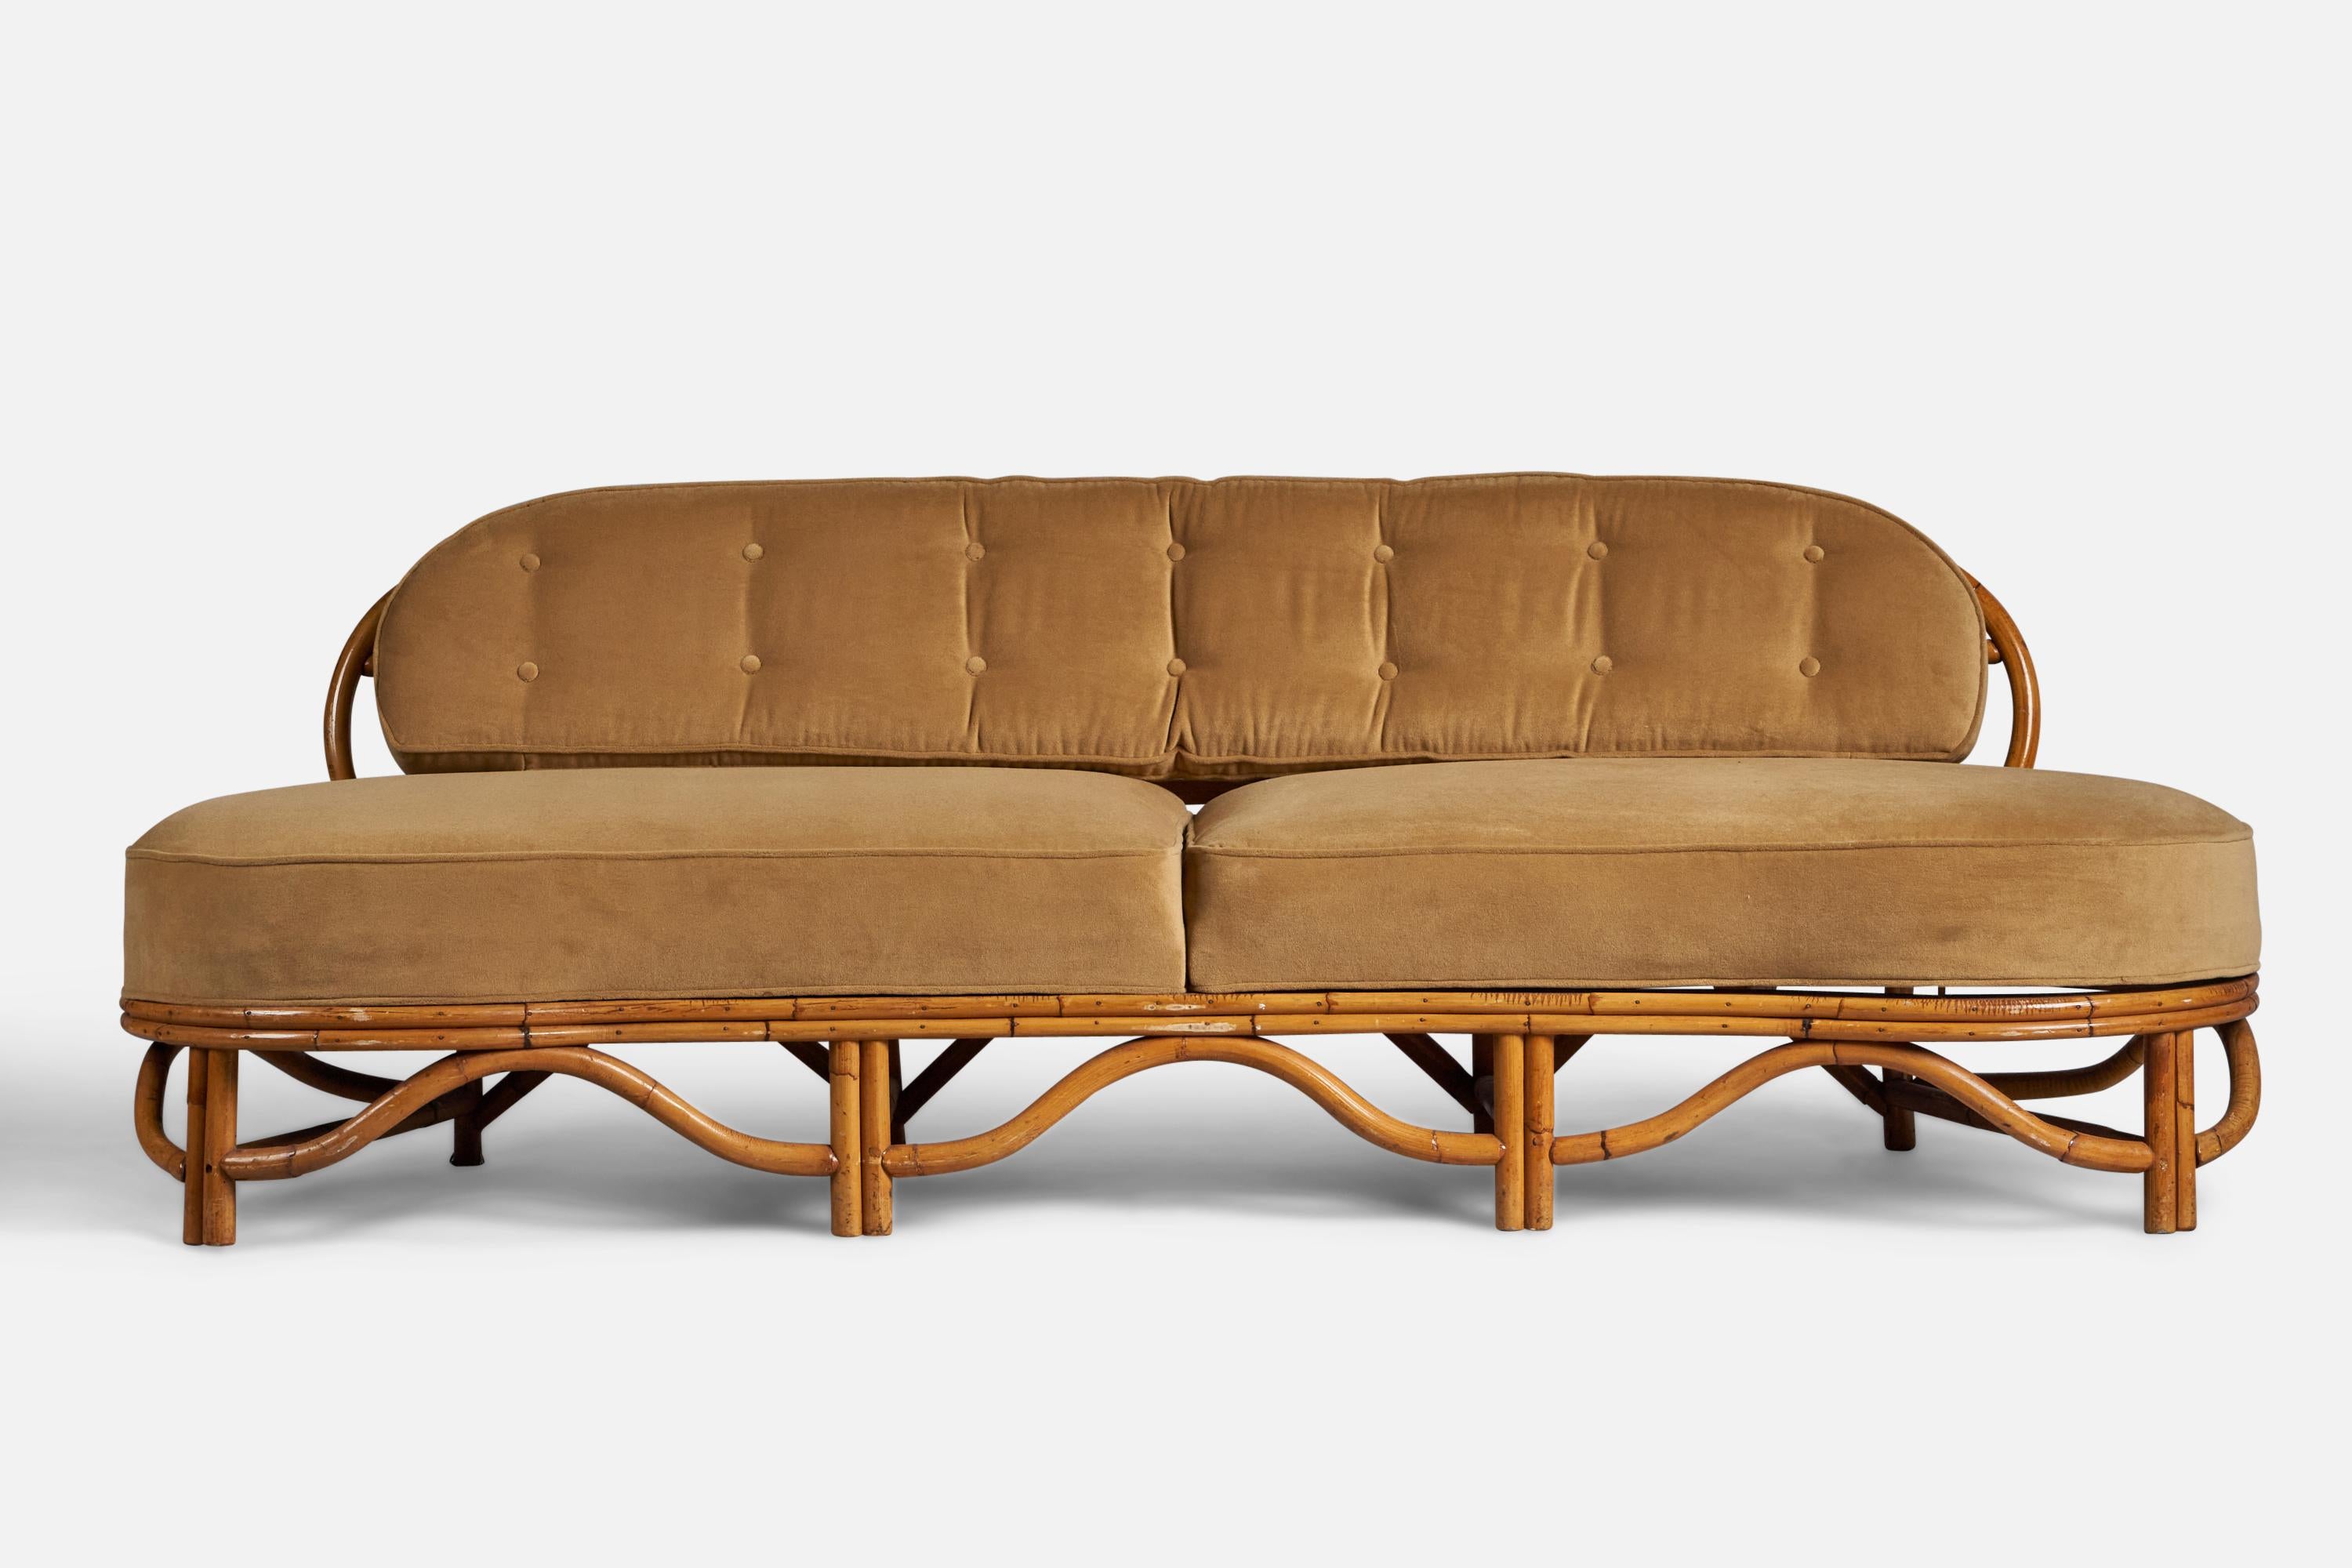 1950s couch styles